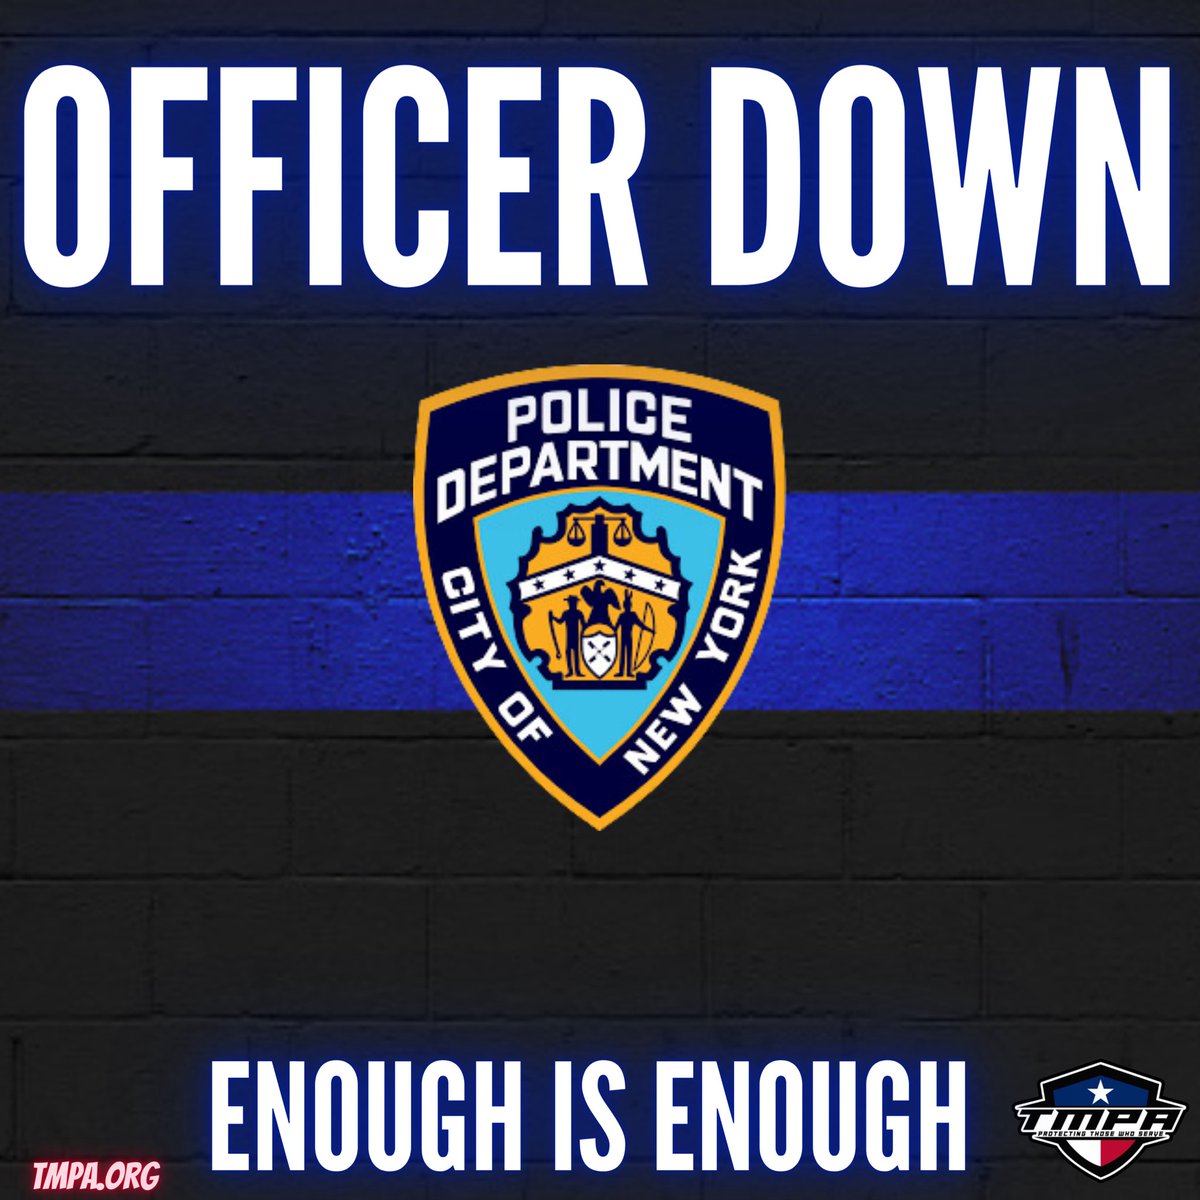 𝐄𝐍𝐎𝐔𝐆𝐇 𝐈𝐒 𝐄𝐍𝐎𝐔𝐆𝐇! Tonight, the NYPD family is in mourning, as a NYPD Ofc was shot down in the line of duty. The culprit? A known criminal with 21 prior arrests, who had no business walking our streets. This isn't just heartbreaking—it's an absolute outrage! We